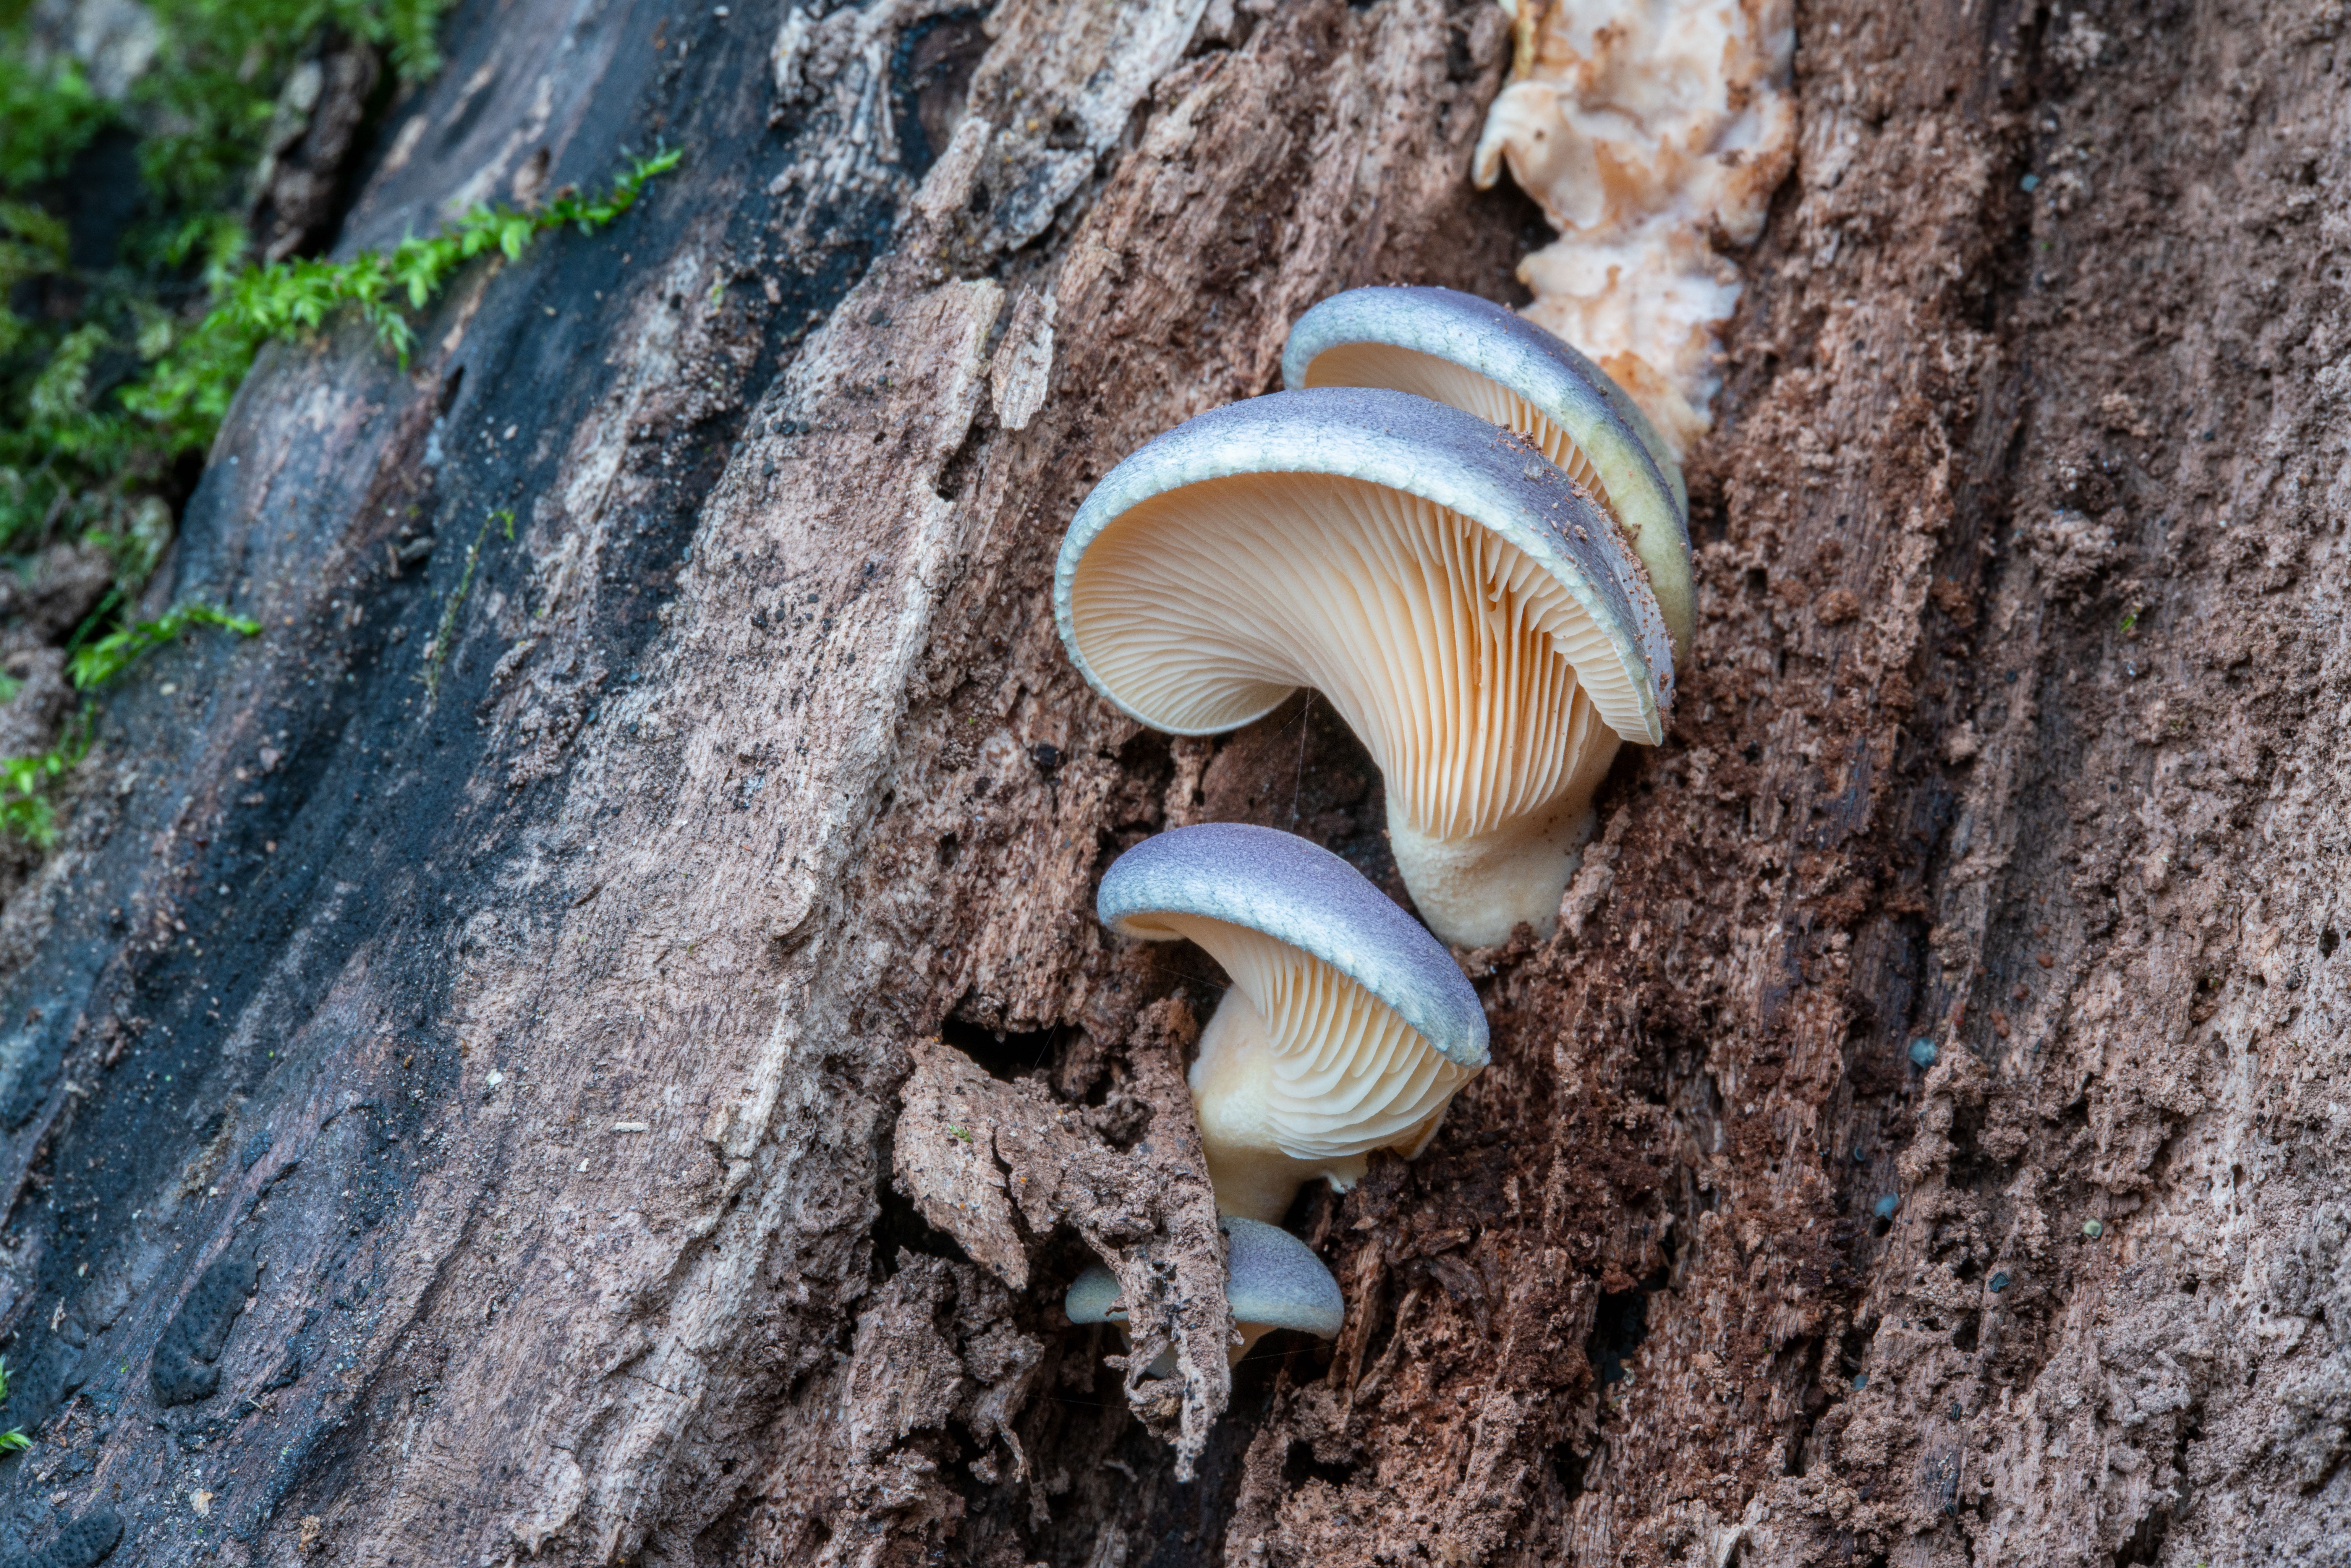 New fungus species found in E China's national park